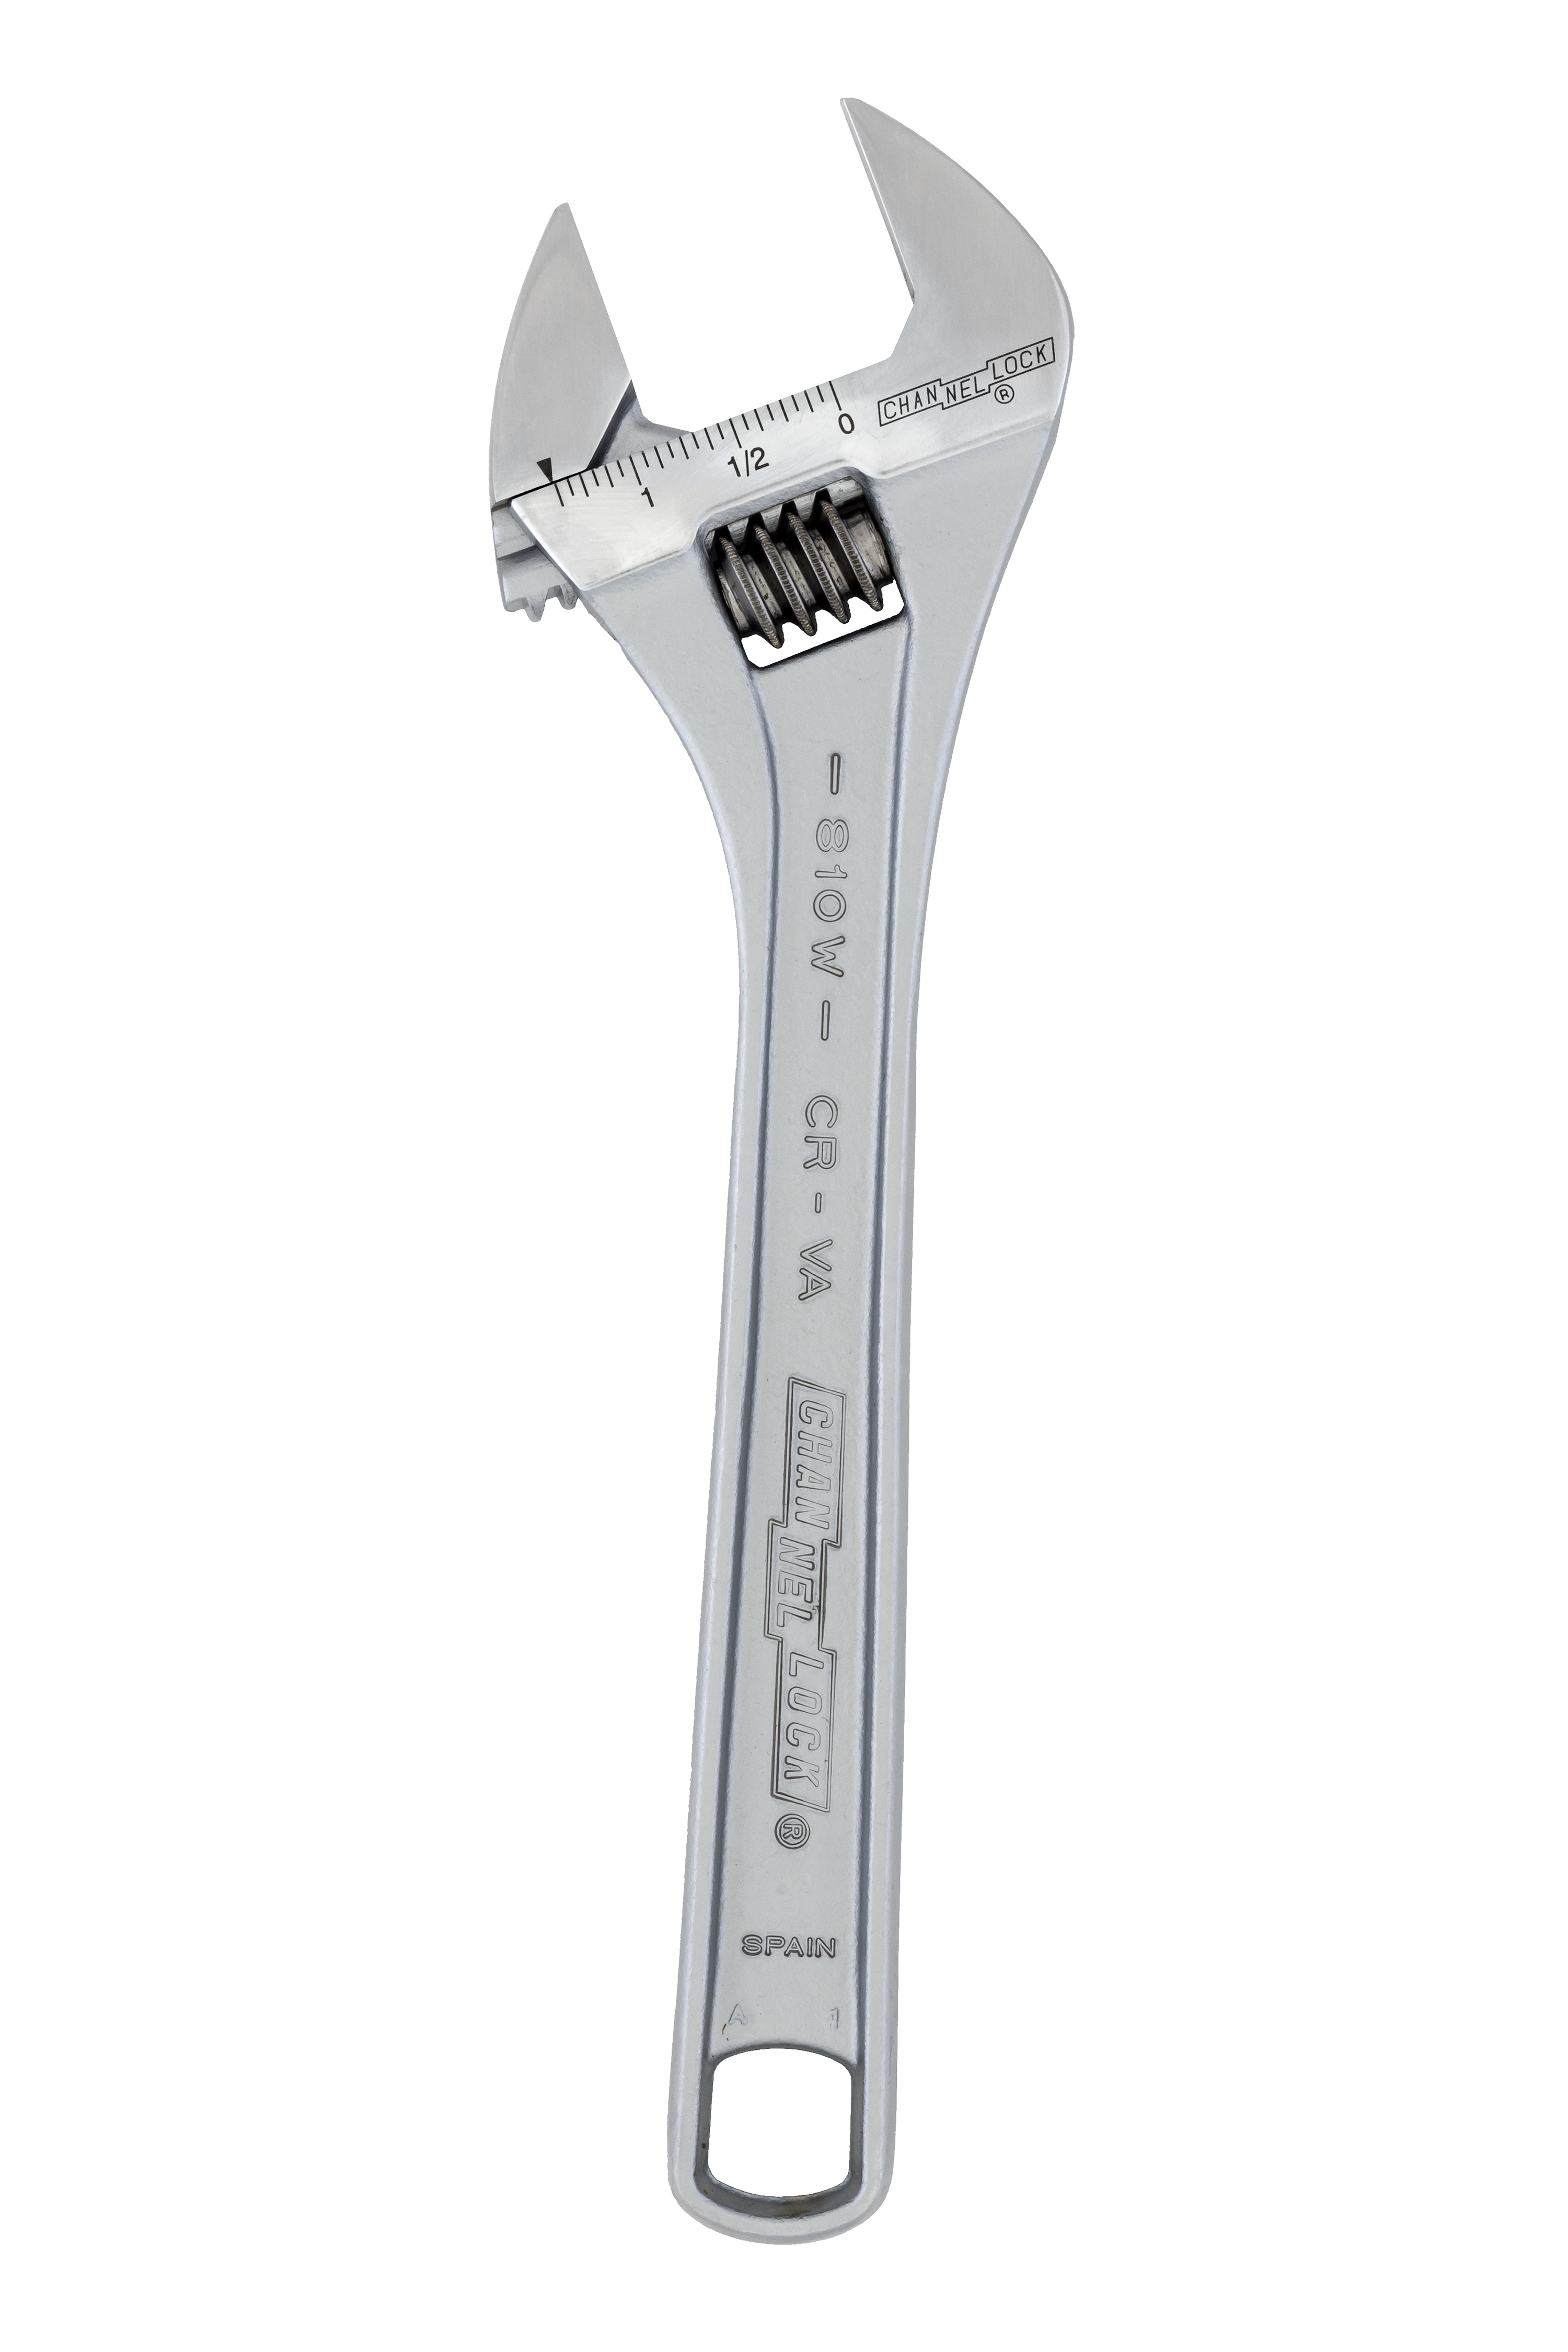 10" Chrome Wide Adjustable Wrench